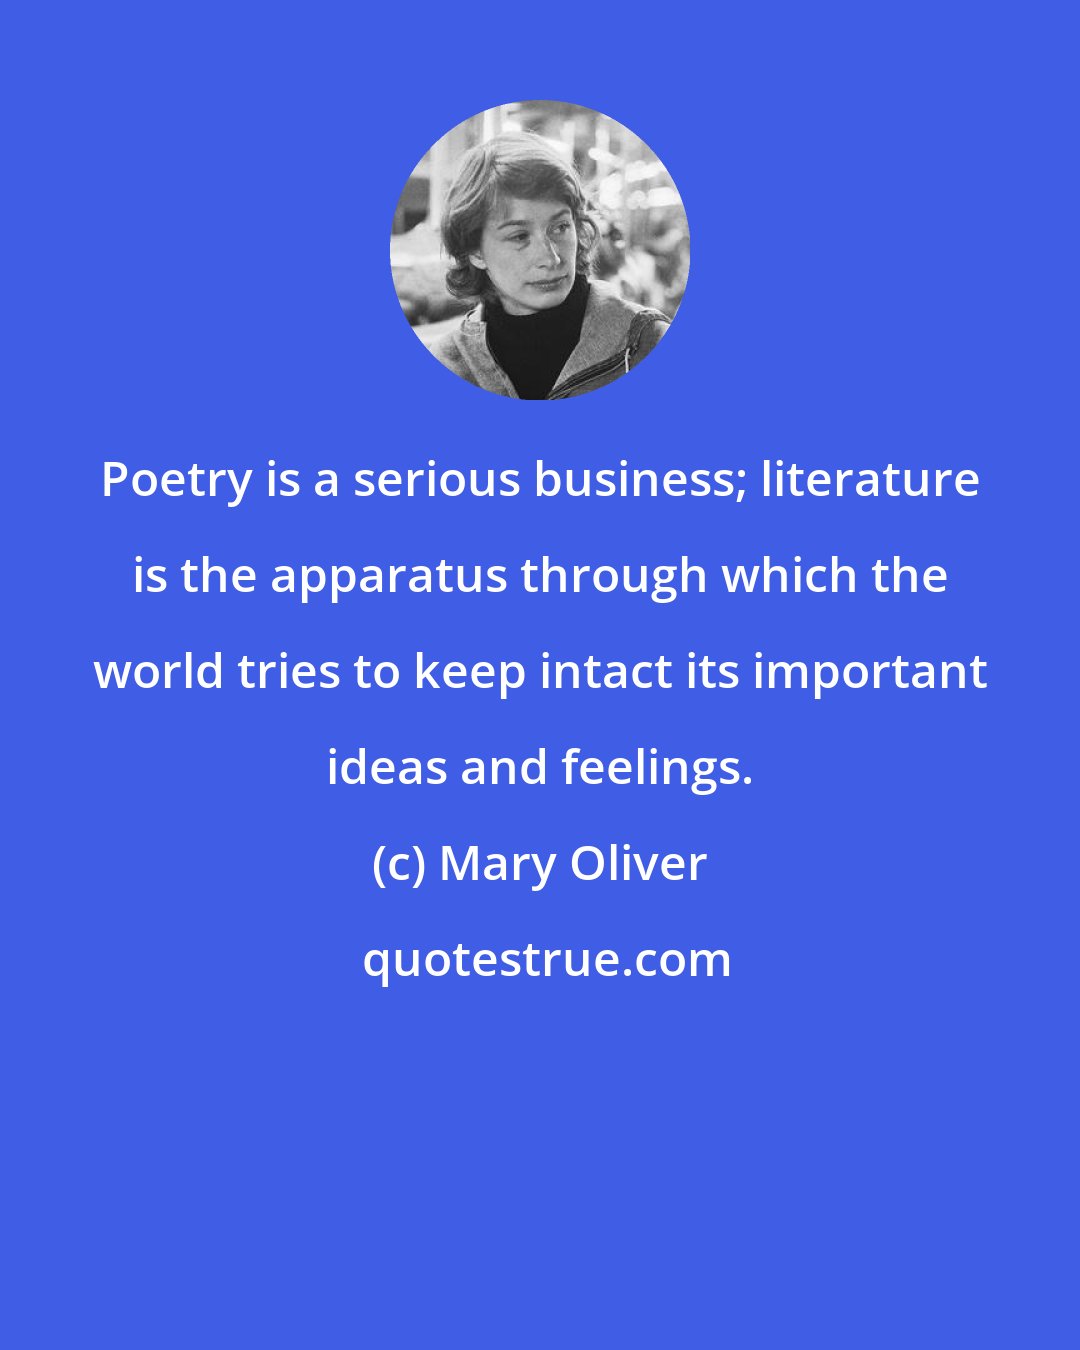 Mary Oliver: Poetry is a serious business; literature is the apparatus through which the world tries to keep intact its important ideas and feelings.